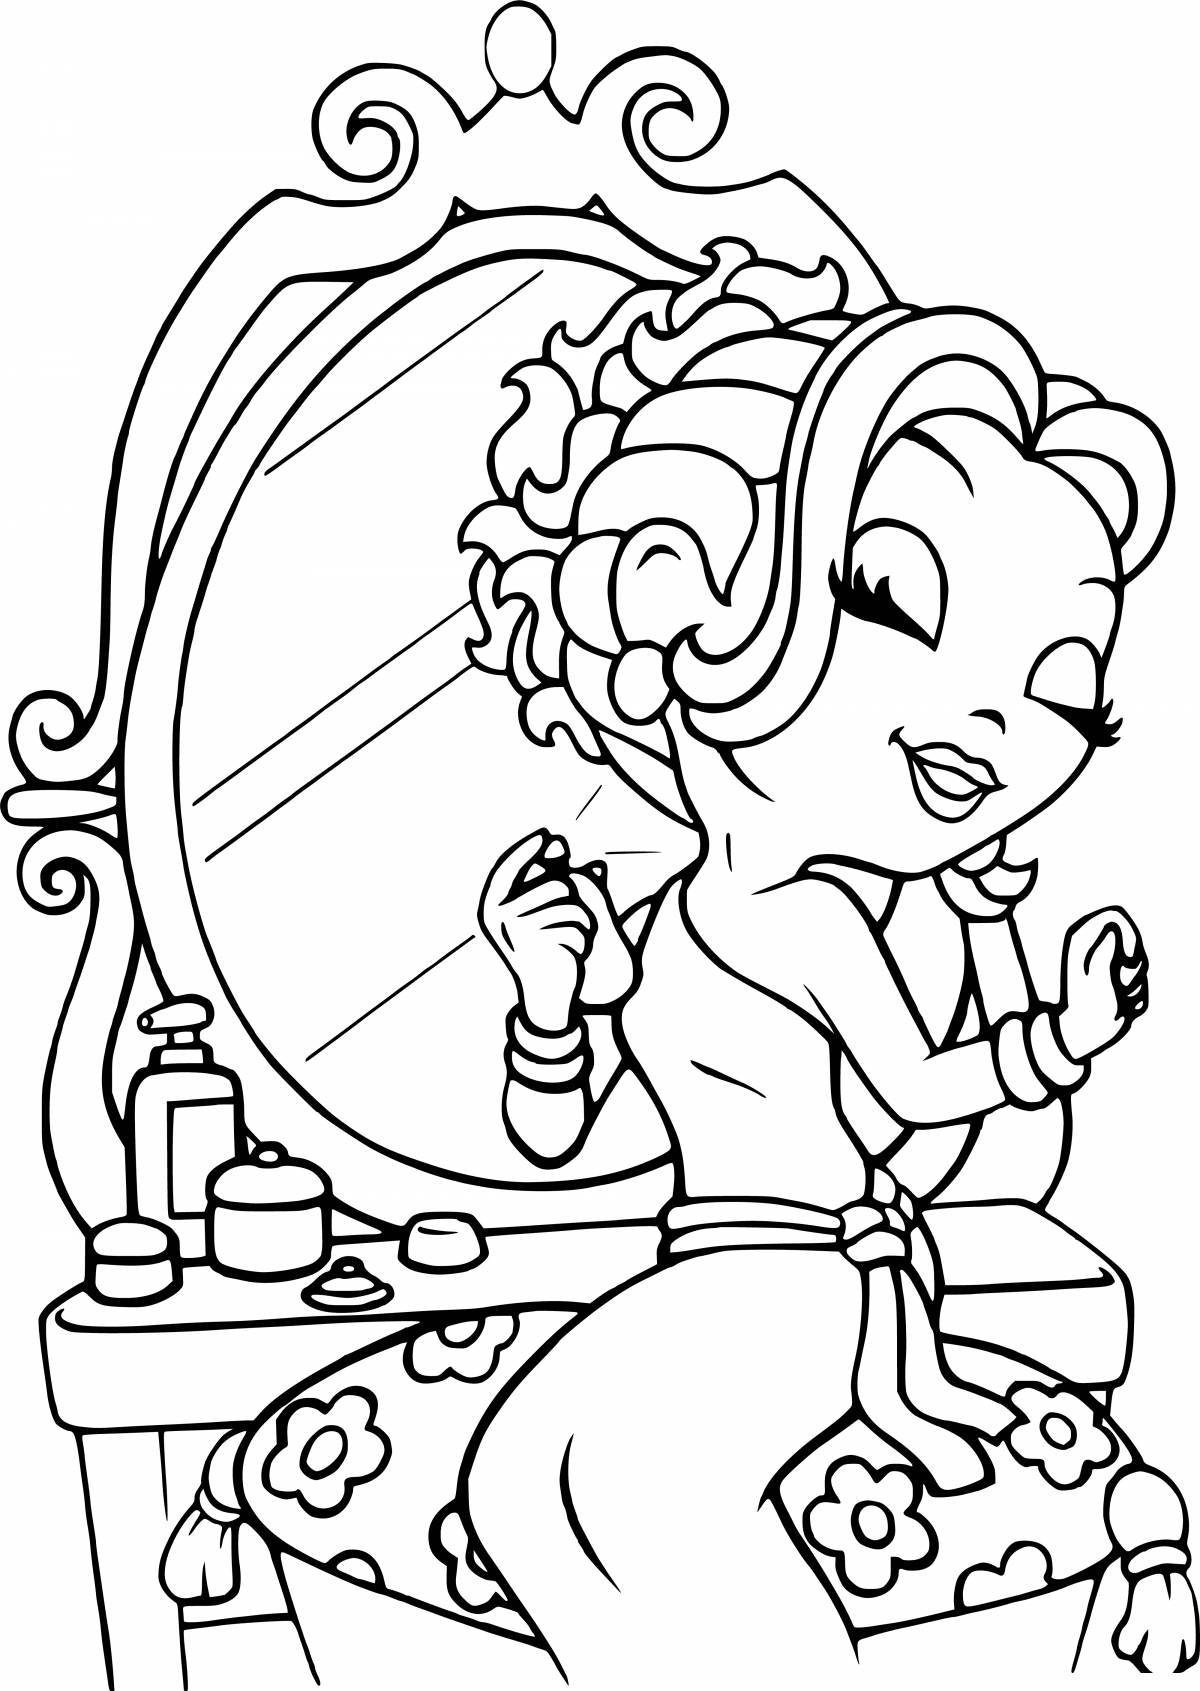 Innovative coloring book for girls